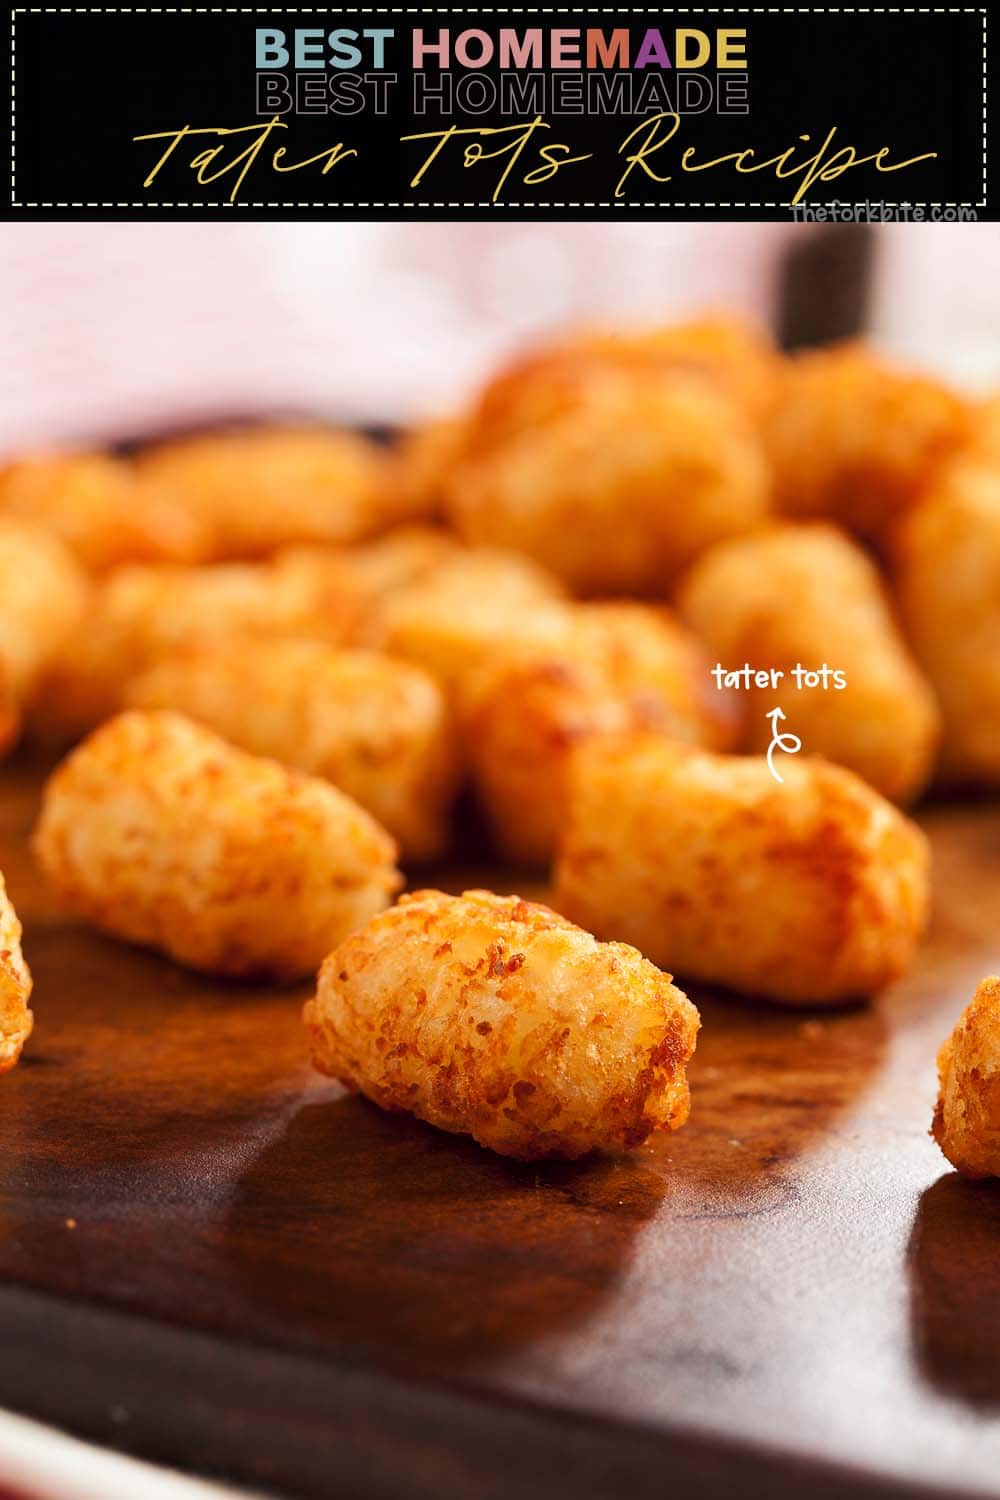 Tater tots from scratch need only common ingredients that you always have in your pantry. In just 40 minutes, you can finish a batch using your air fryer.